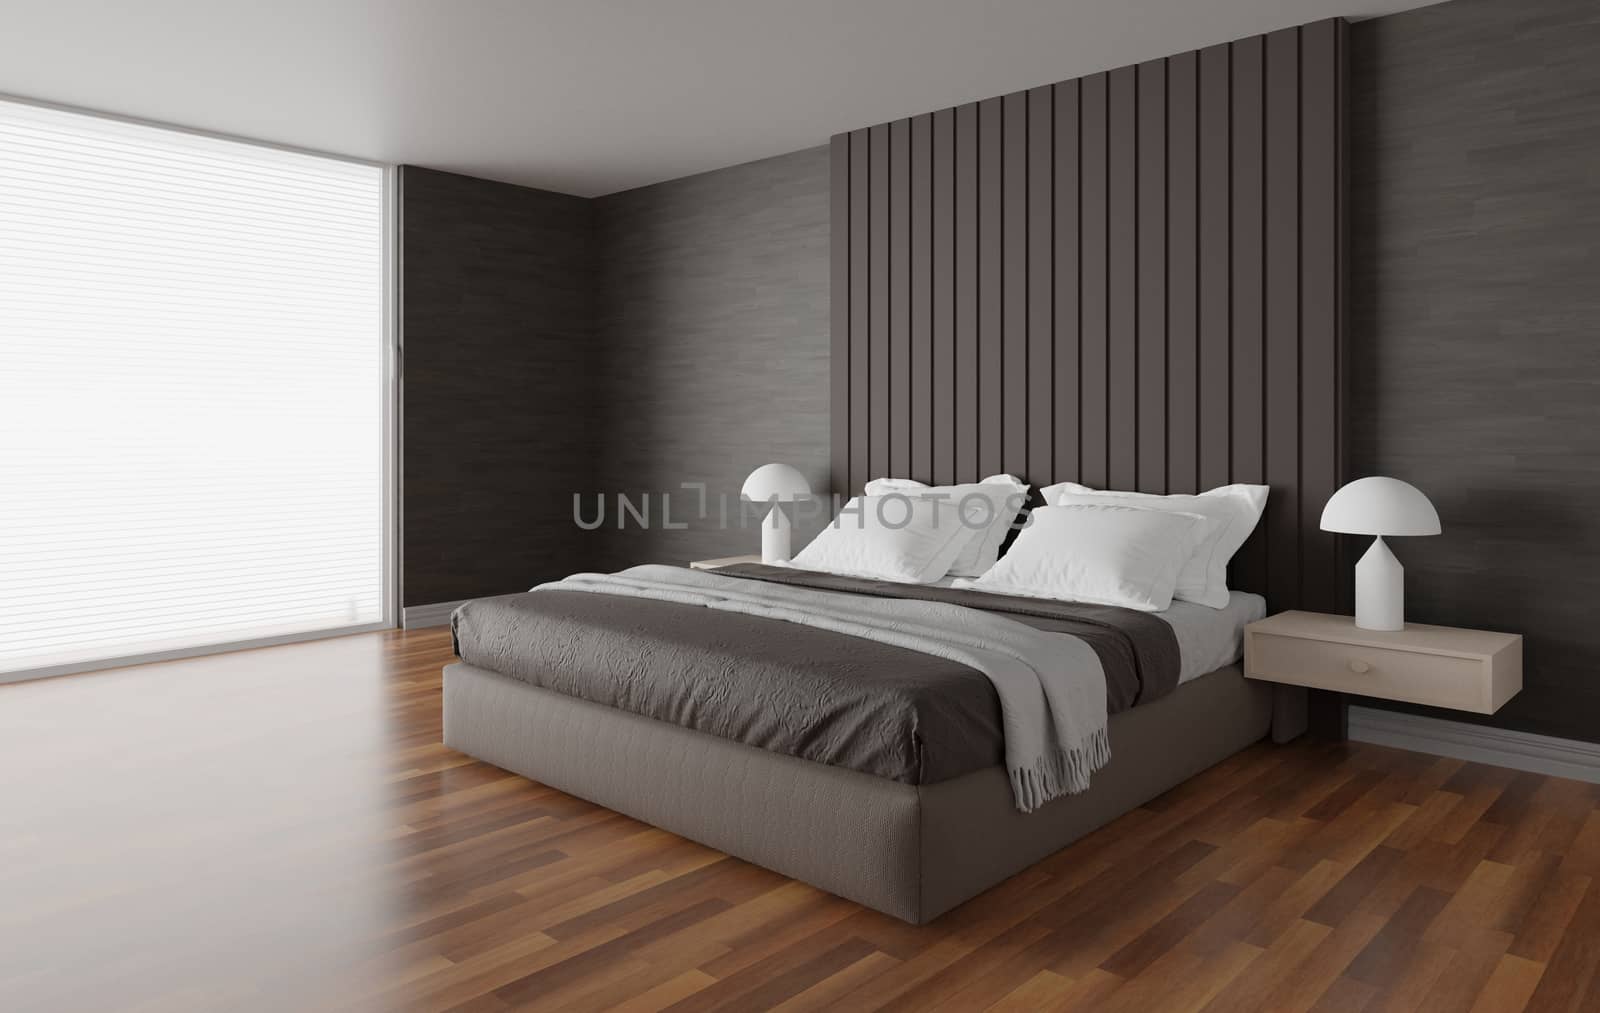 Bedroom interior with bed and large window, minimalist and modern style, 3d render background